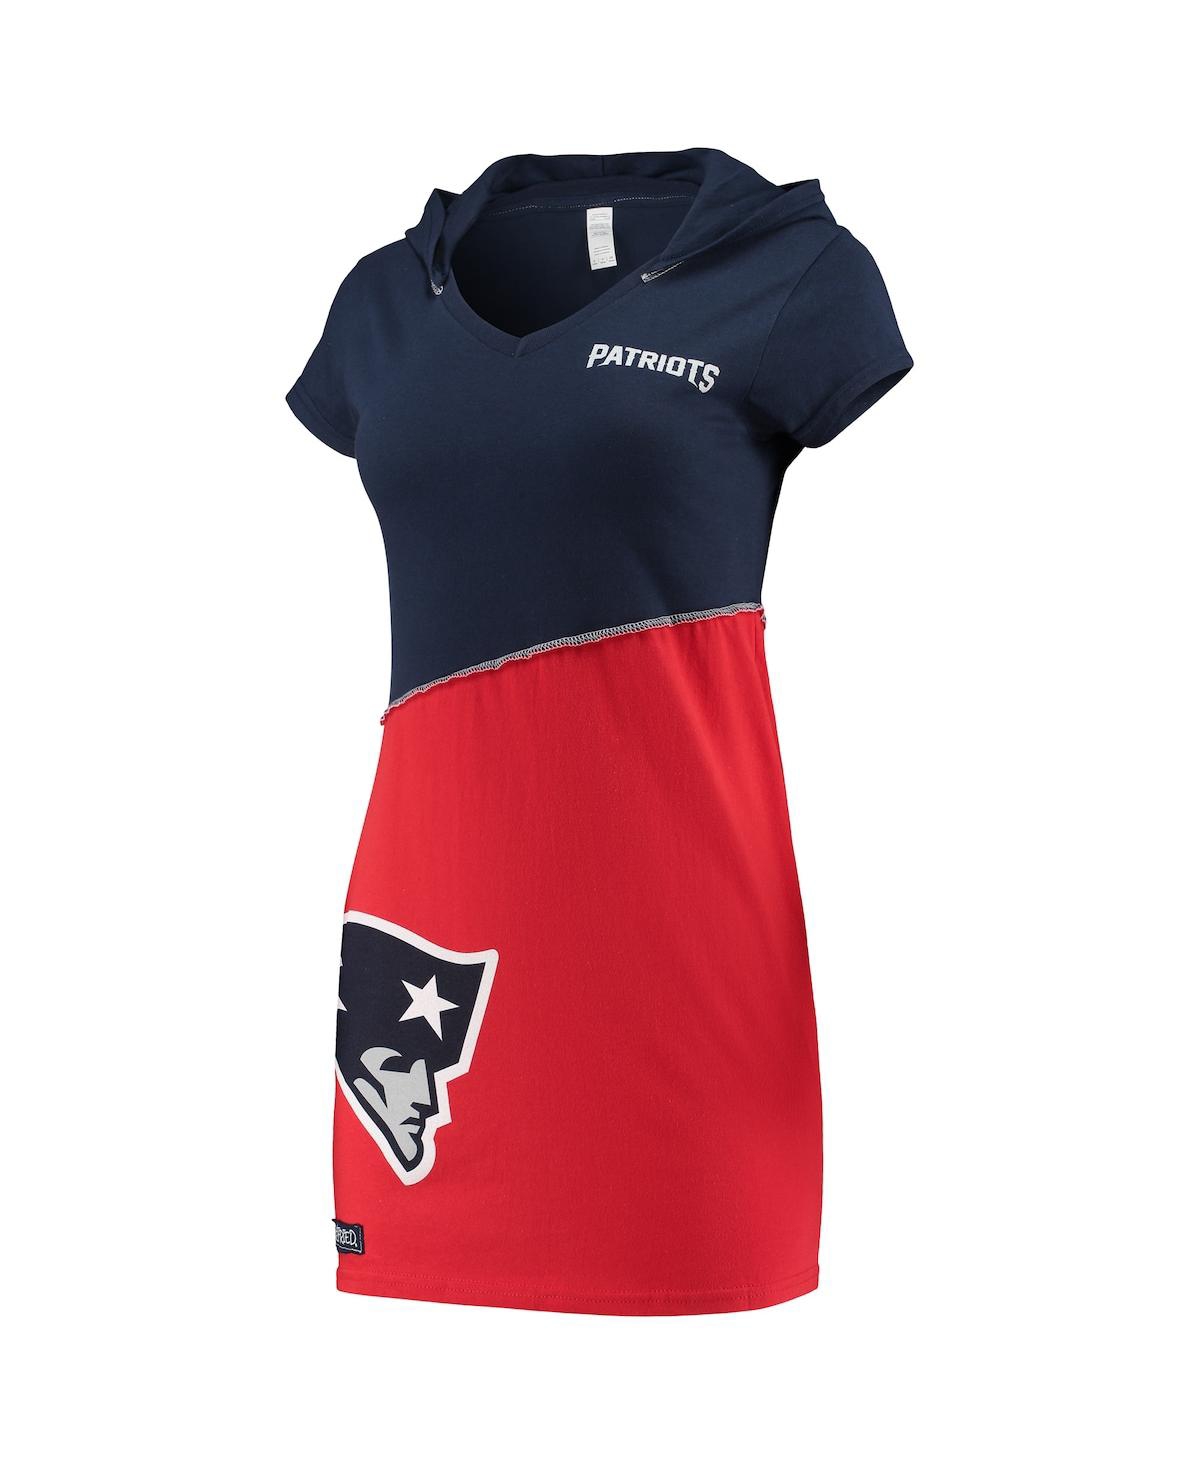 Women's Refried Apparel Navy and Red New England Patriots Hooded Mini Dress - Navy, Red